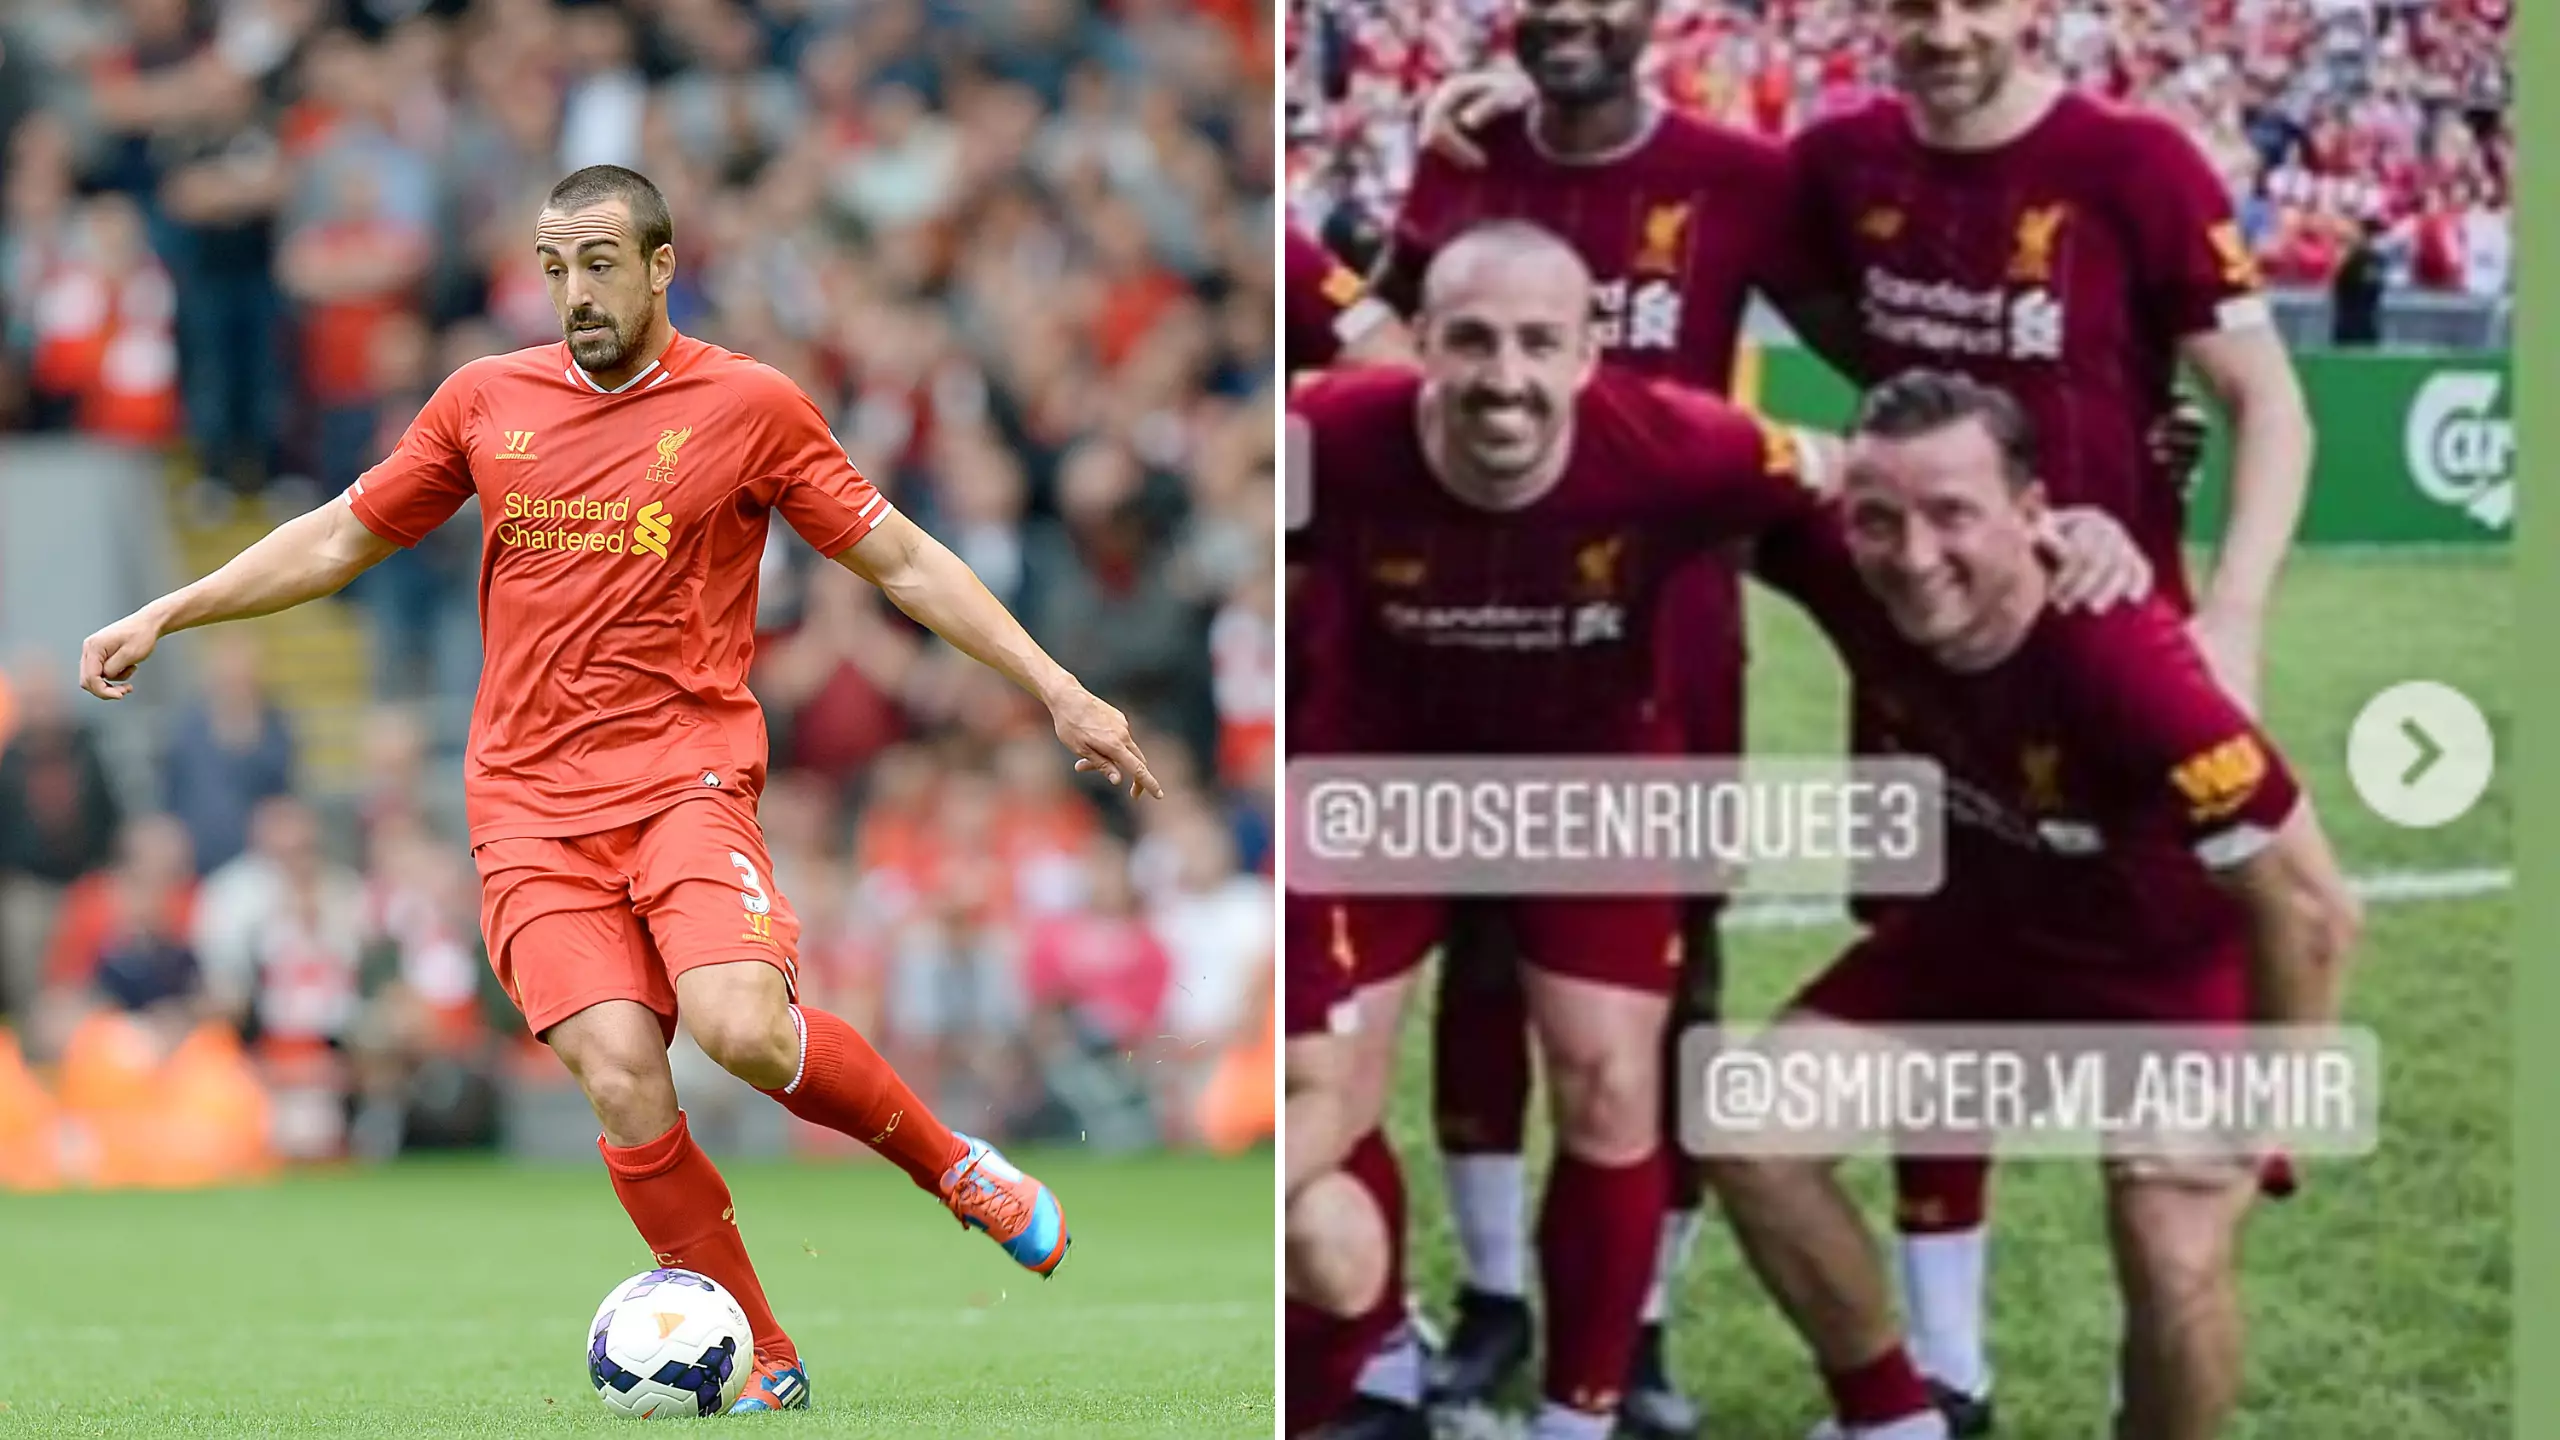 Jose Enrique Has Played For The First Time Since Beating Brain Cancer